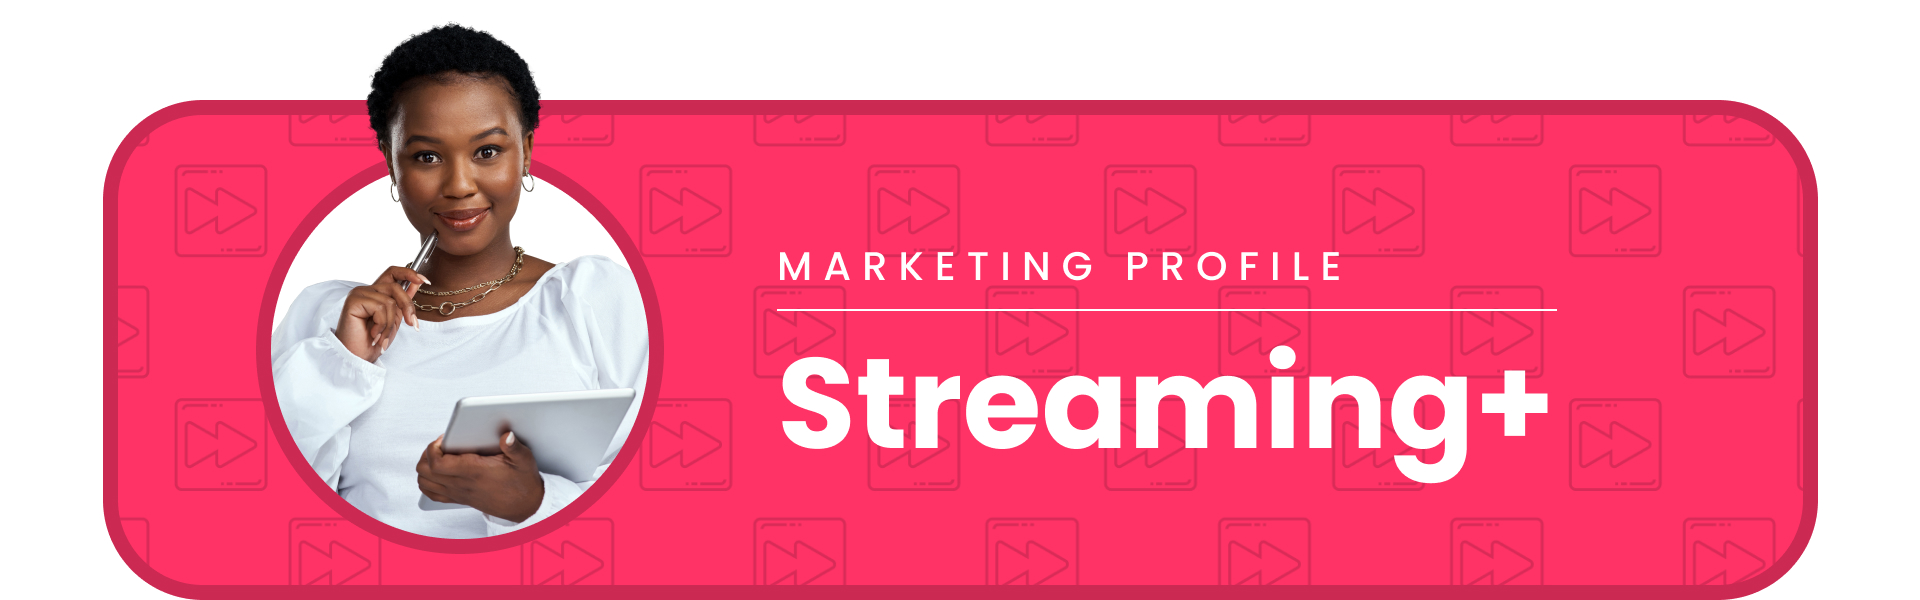 Graphic reading “Marketing Profile: Streaming+”